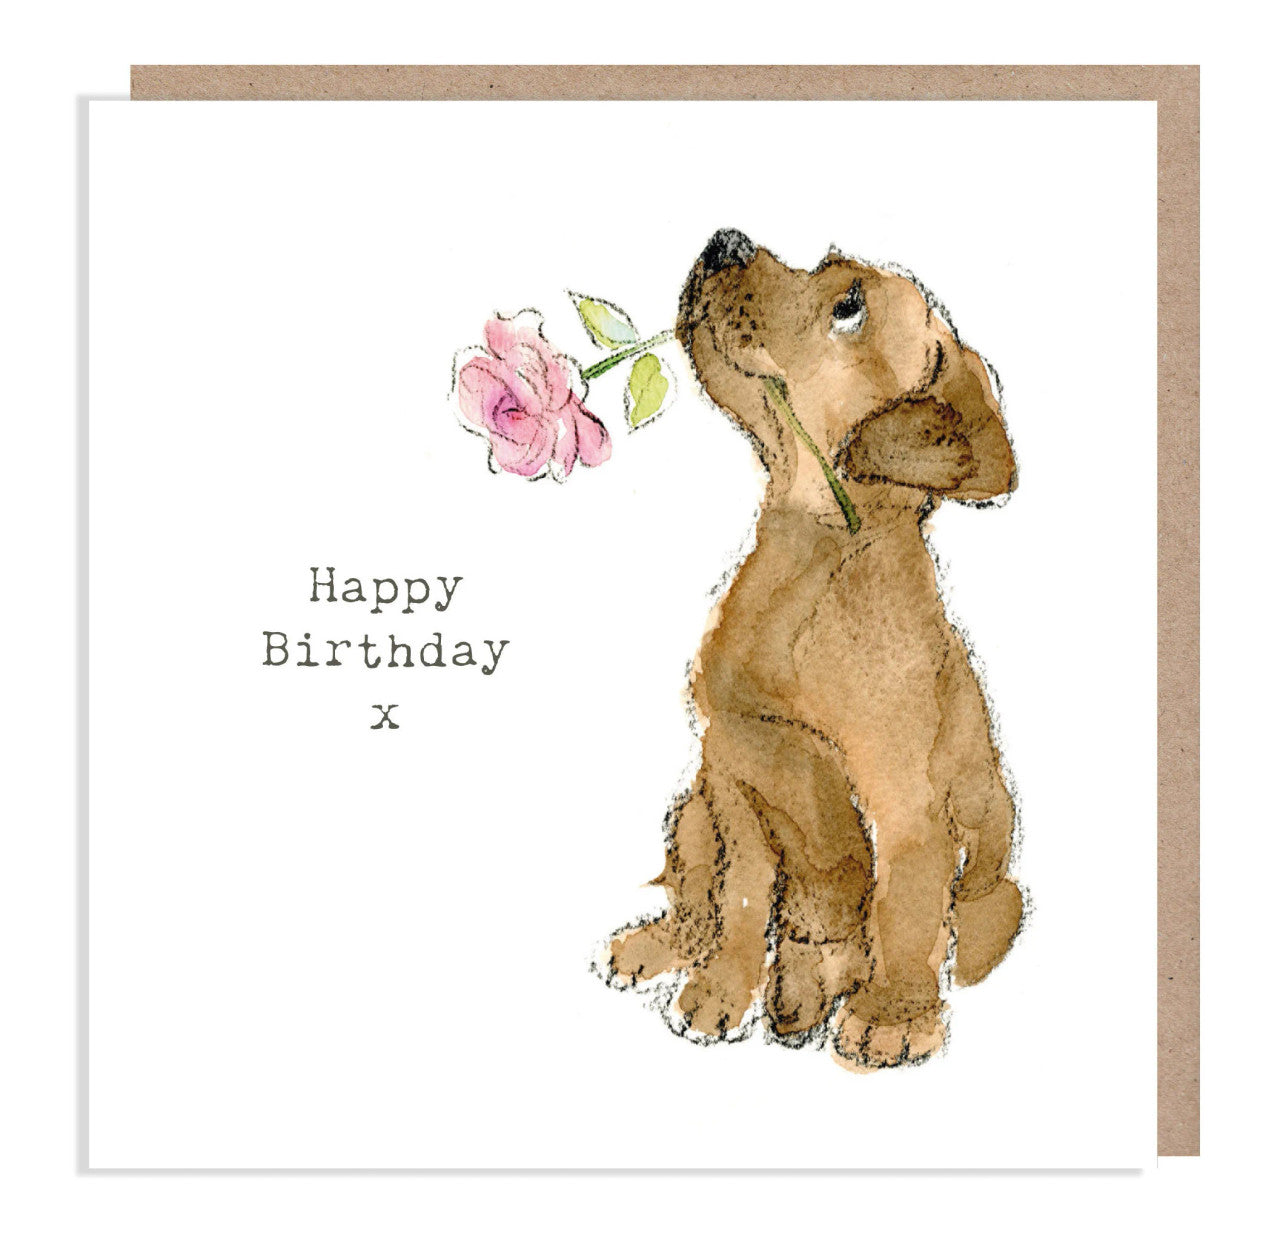 Chocolate Labrador with Pink Rose Birthday Greetings Card from Paper Shed Designs